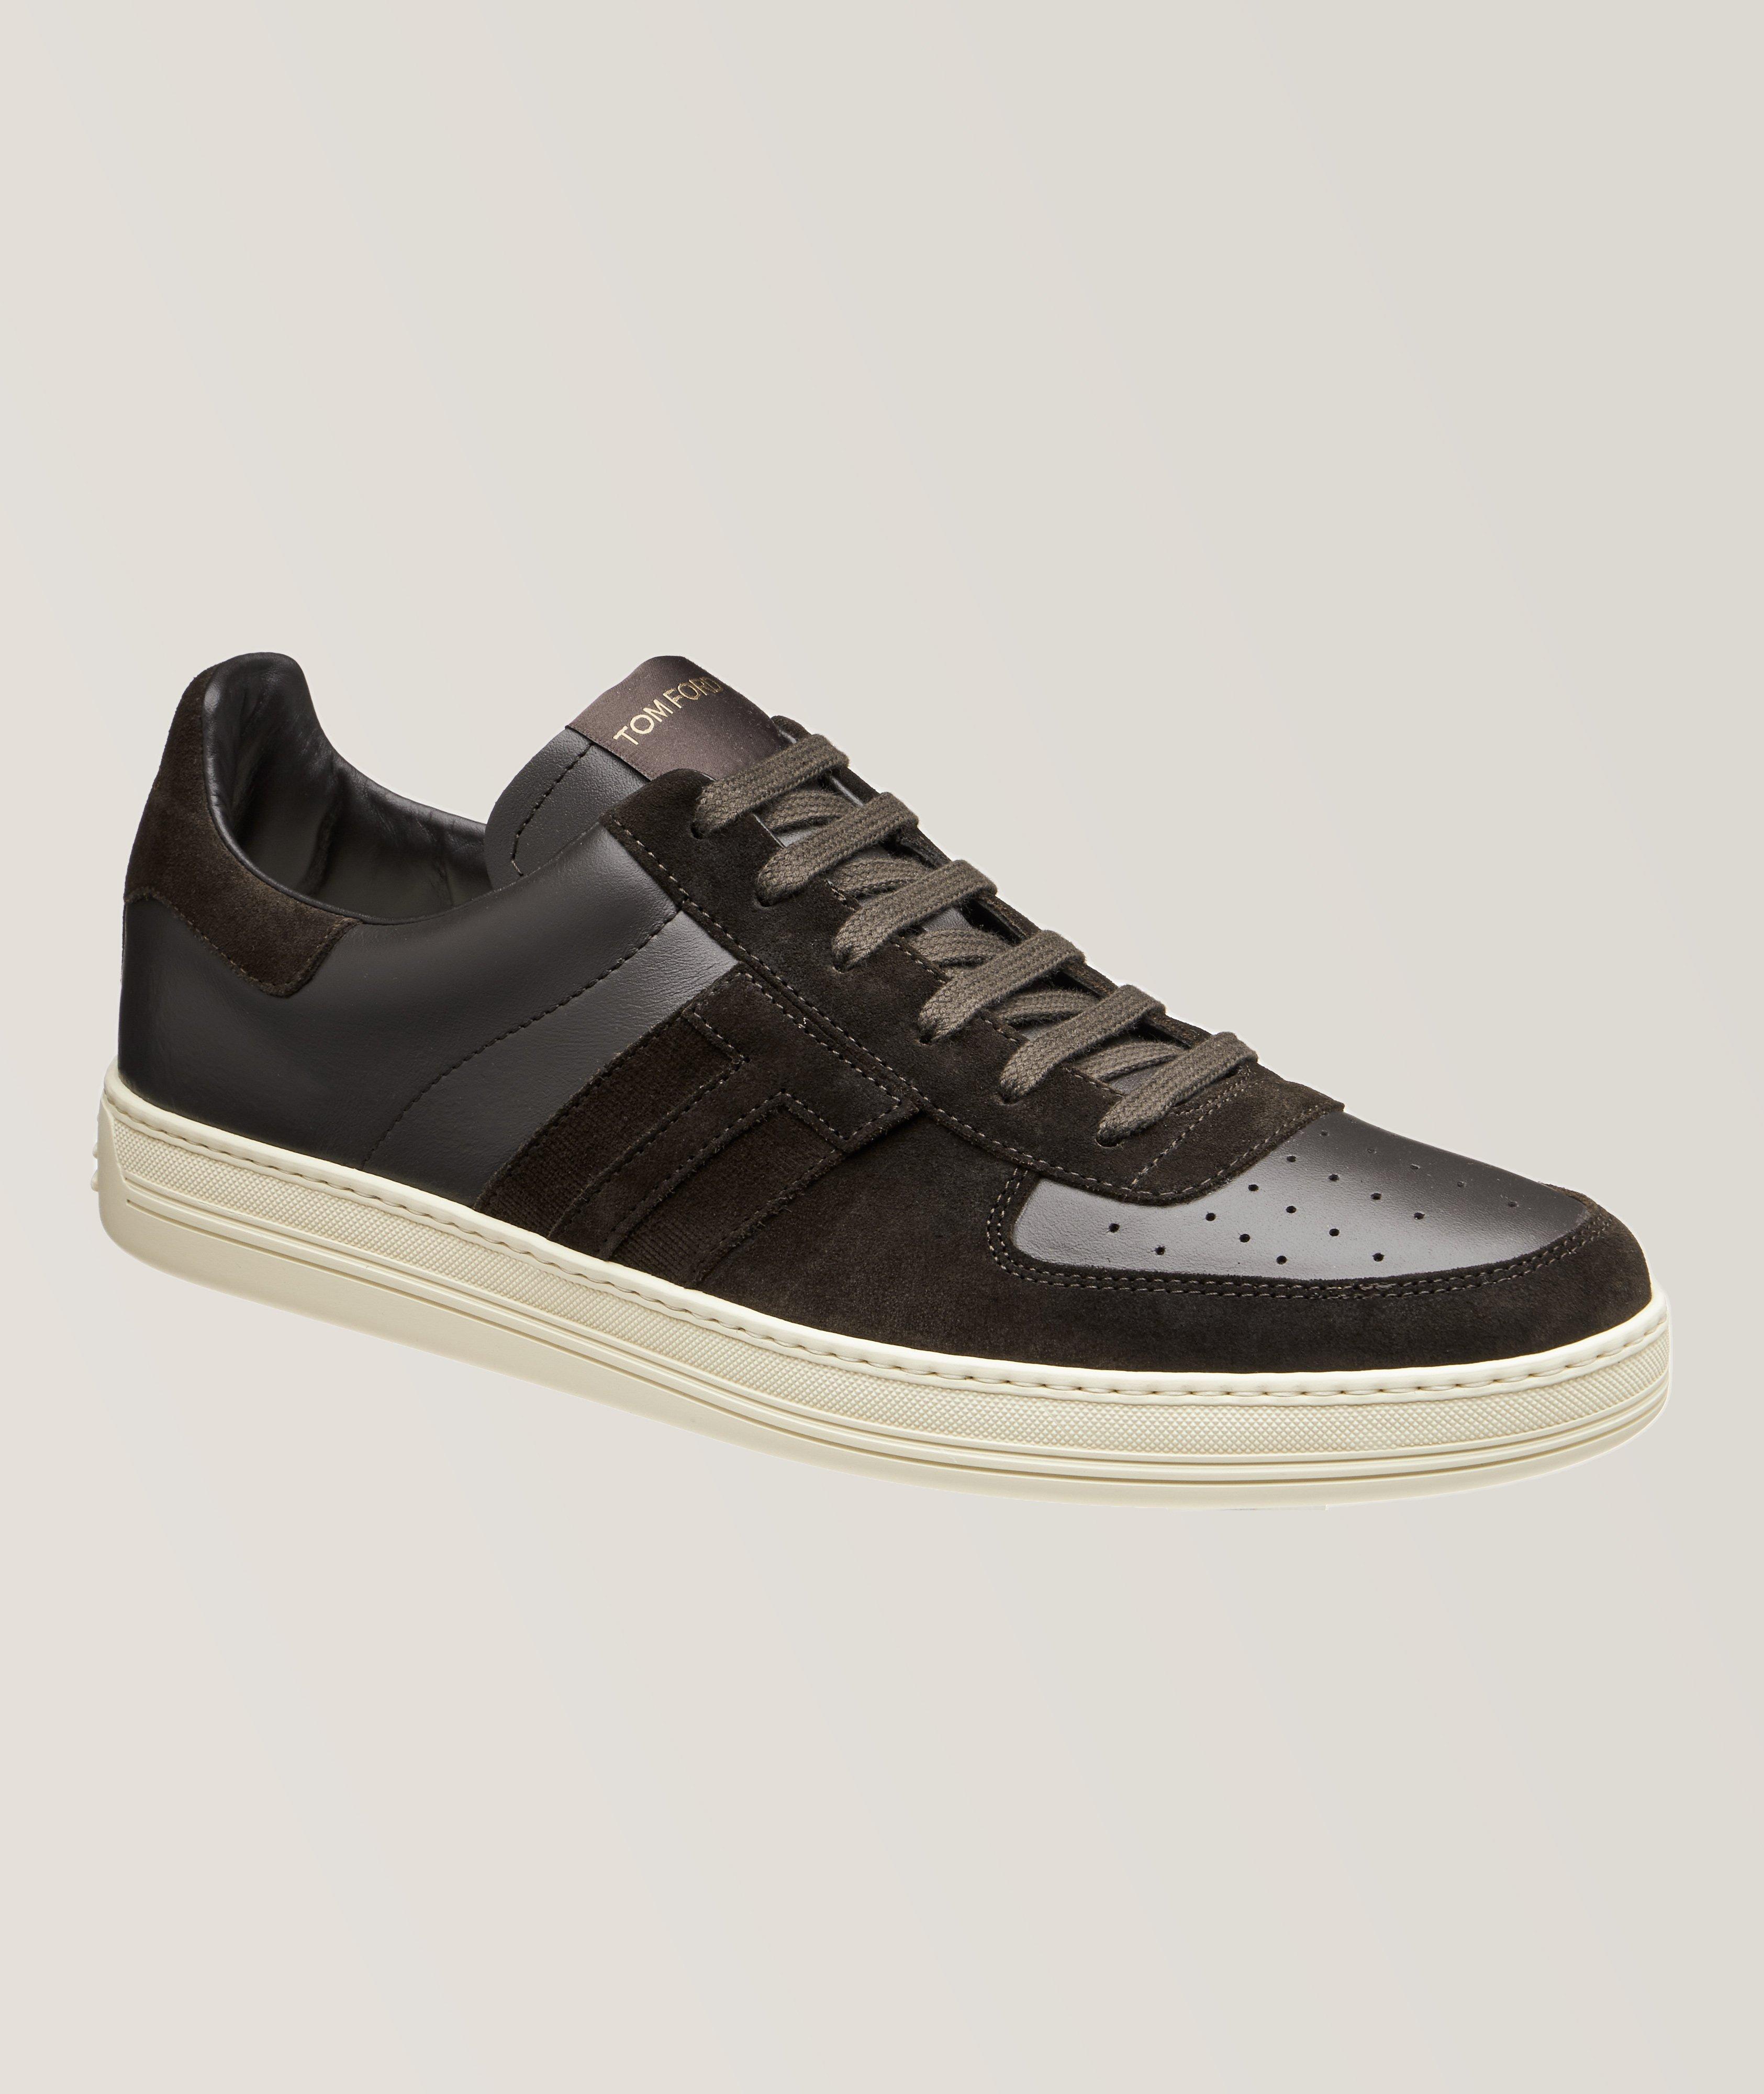 Radcliffe Tonal Suede Leather Sneakers  image 0